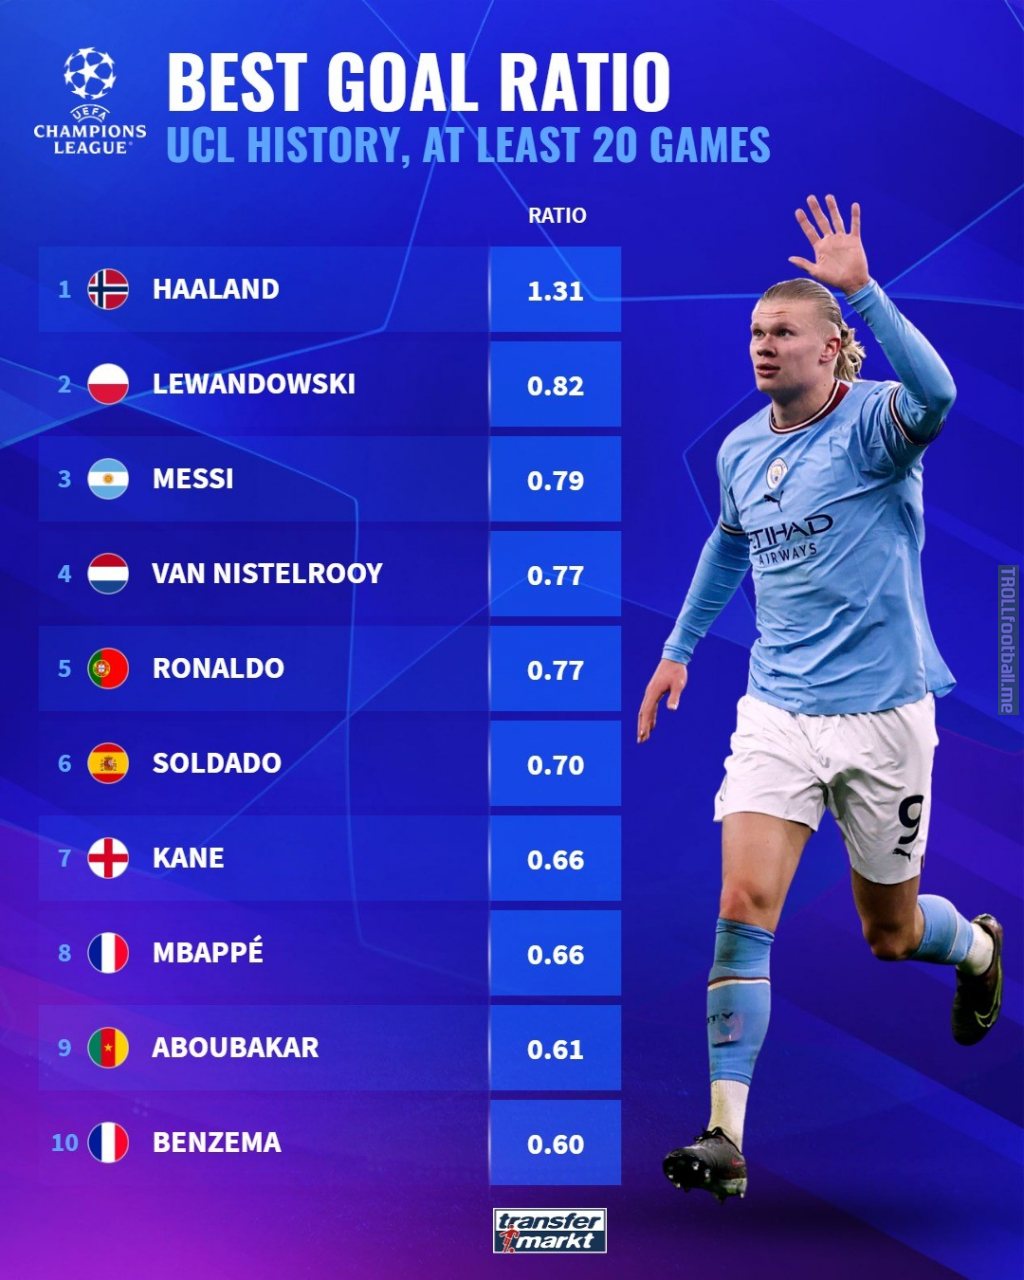 [championsleague] Best goal ratio in UCL history(at least 20 games)